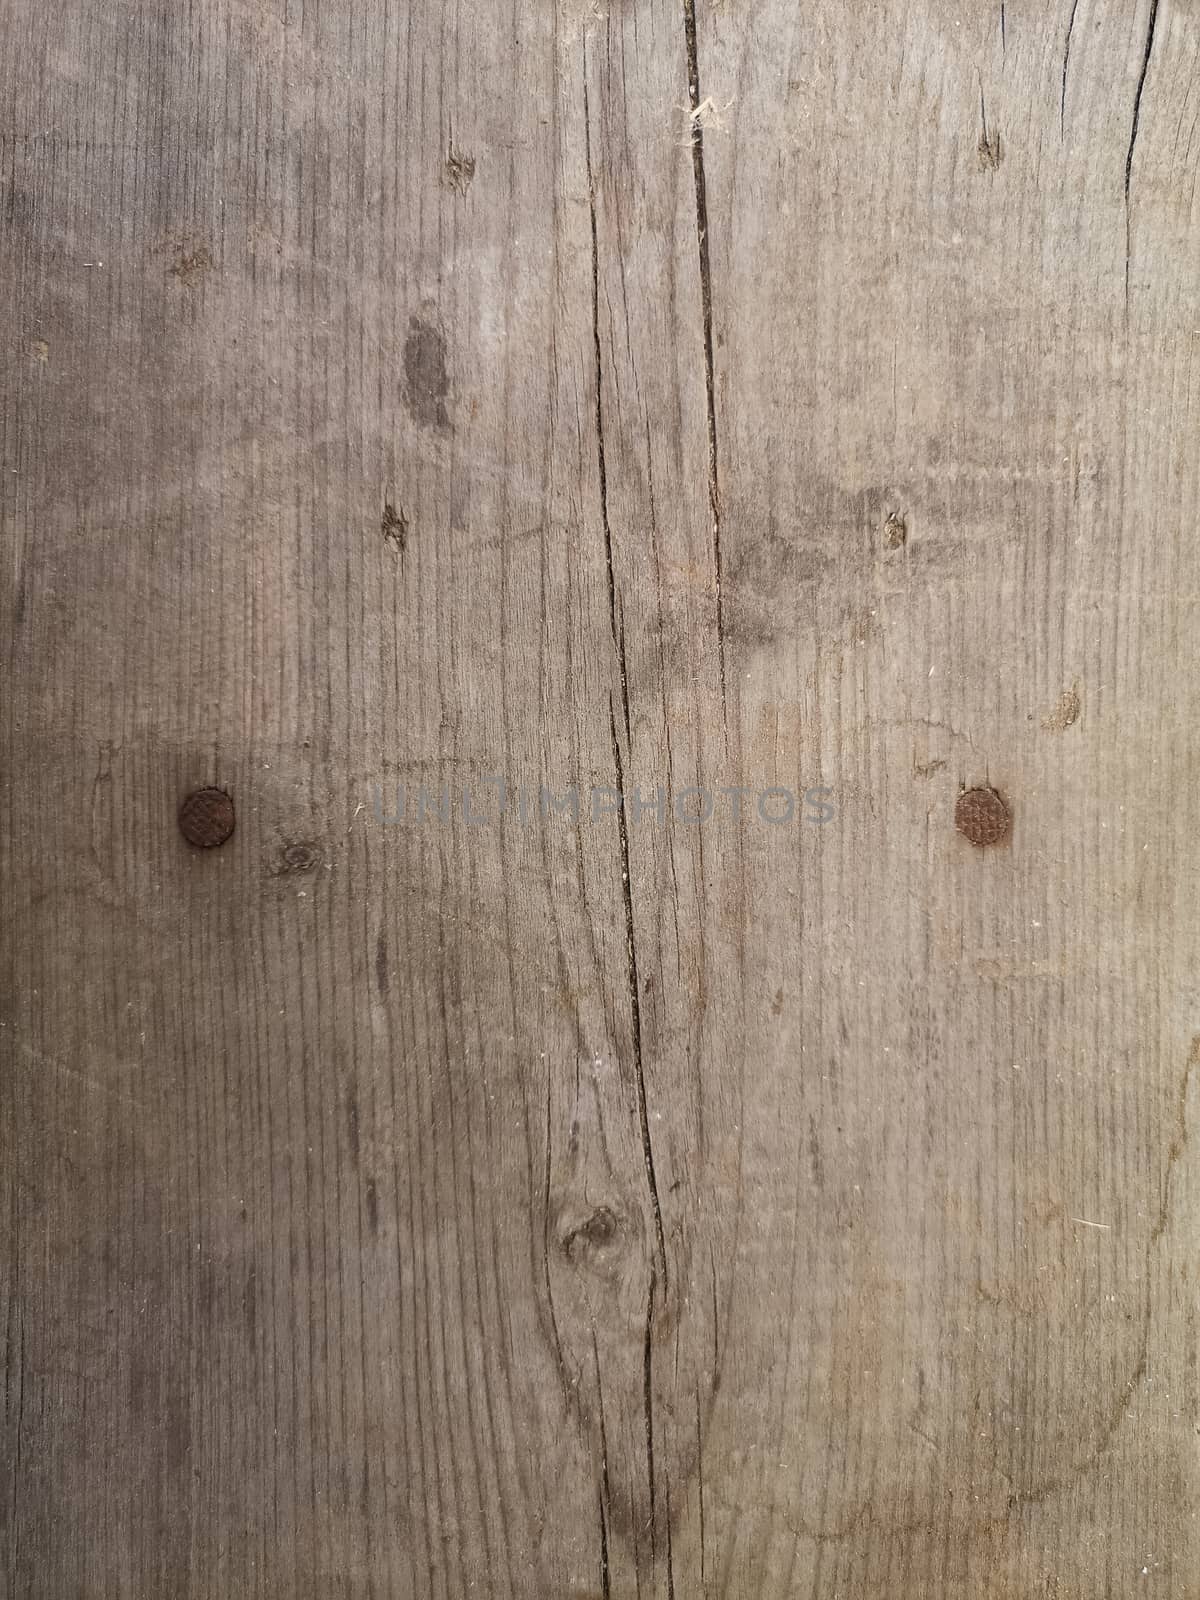 Brown painted wood texture background wood texture with natural pattern by galinasharapova